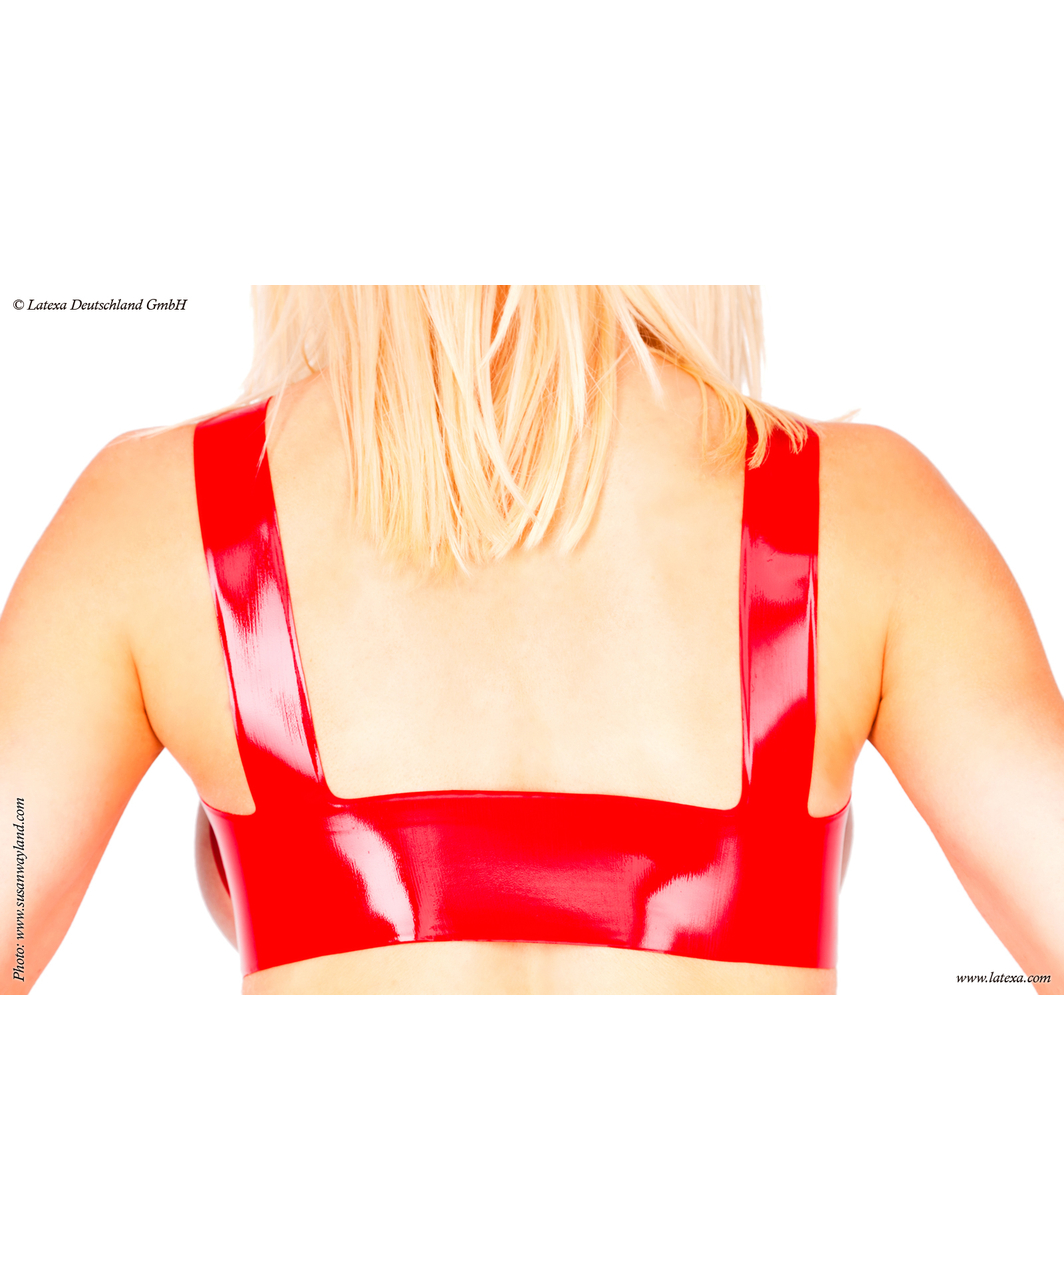 Latexa Bra with cut-out breasts, moulded